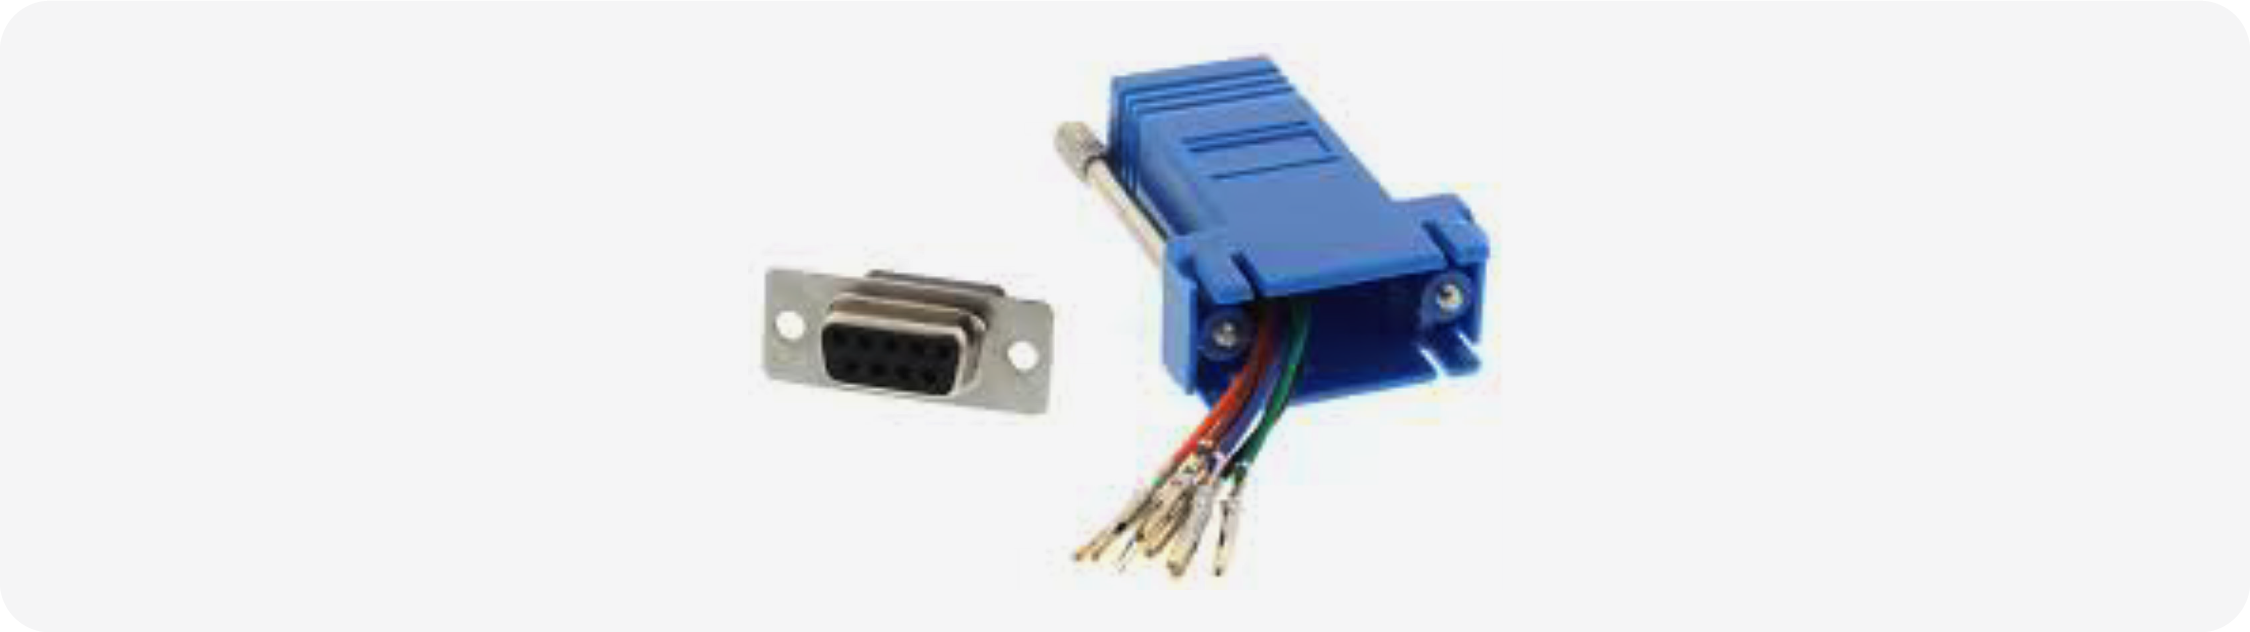 RJ45 to DB9 configurable adapter